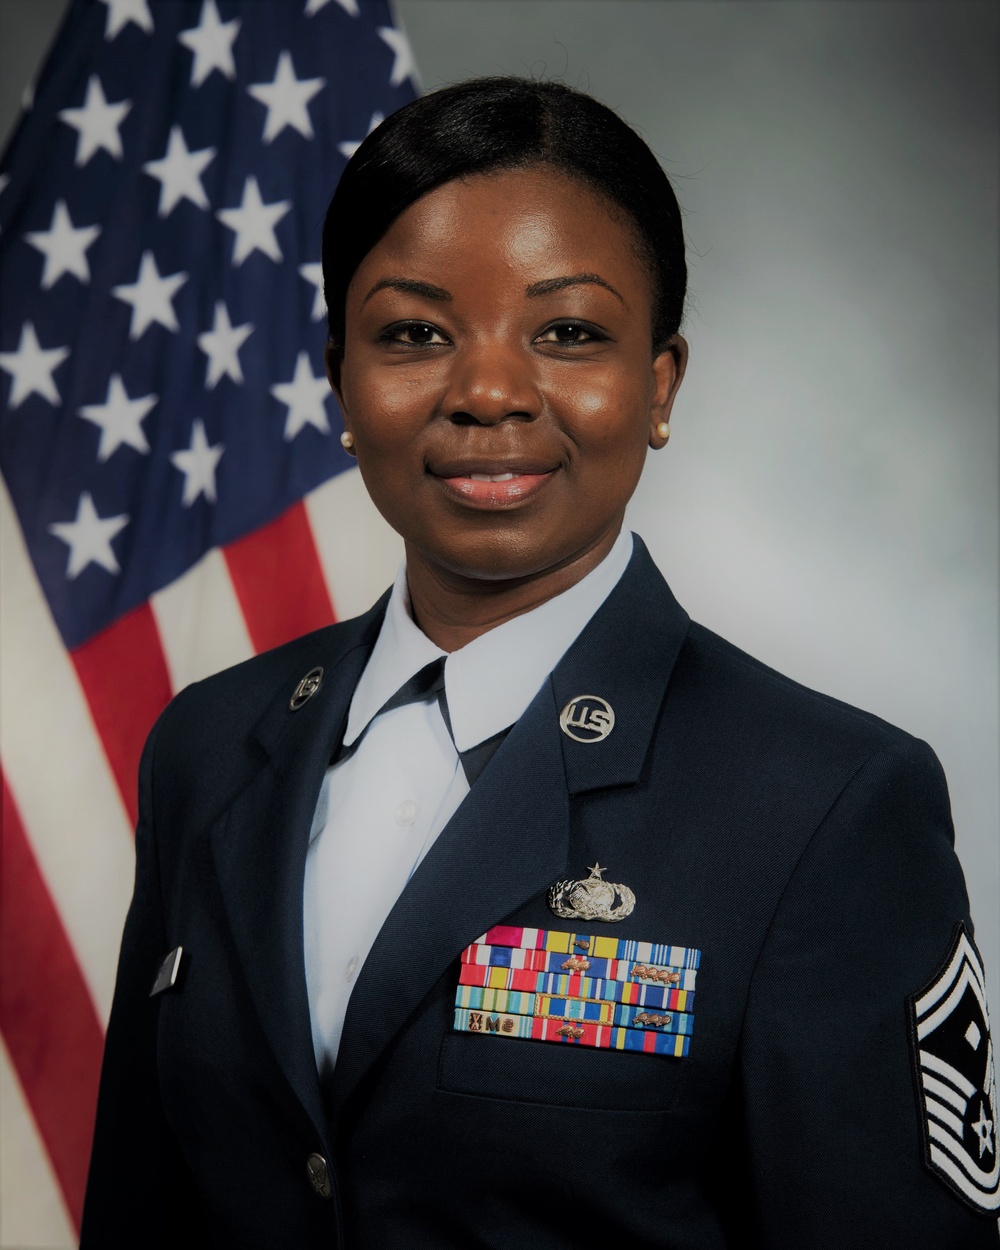 From Little Girl in Ghana to Legislative Fellow in the U.S. Government; Reserve Citizen Airman embodies the American Dream